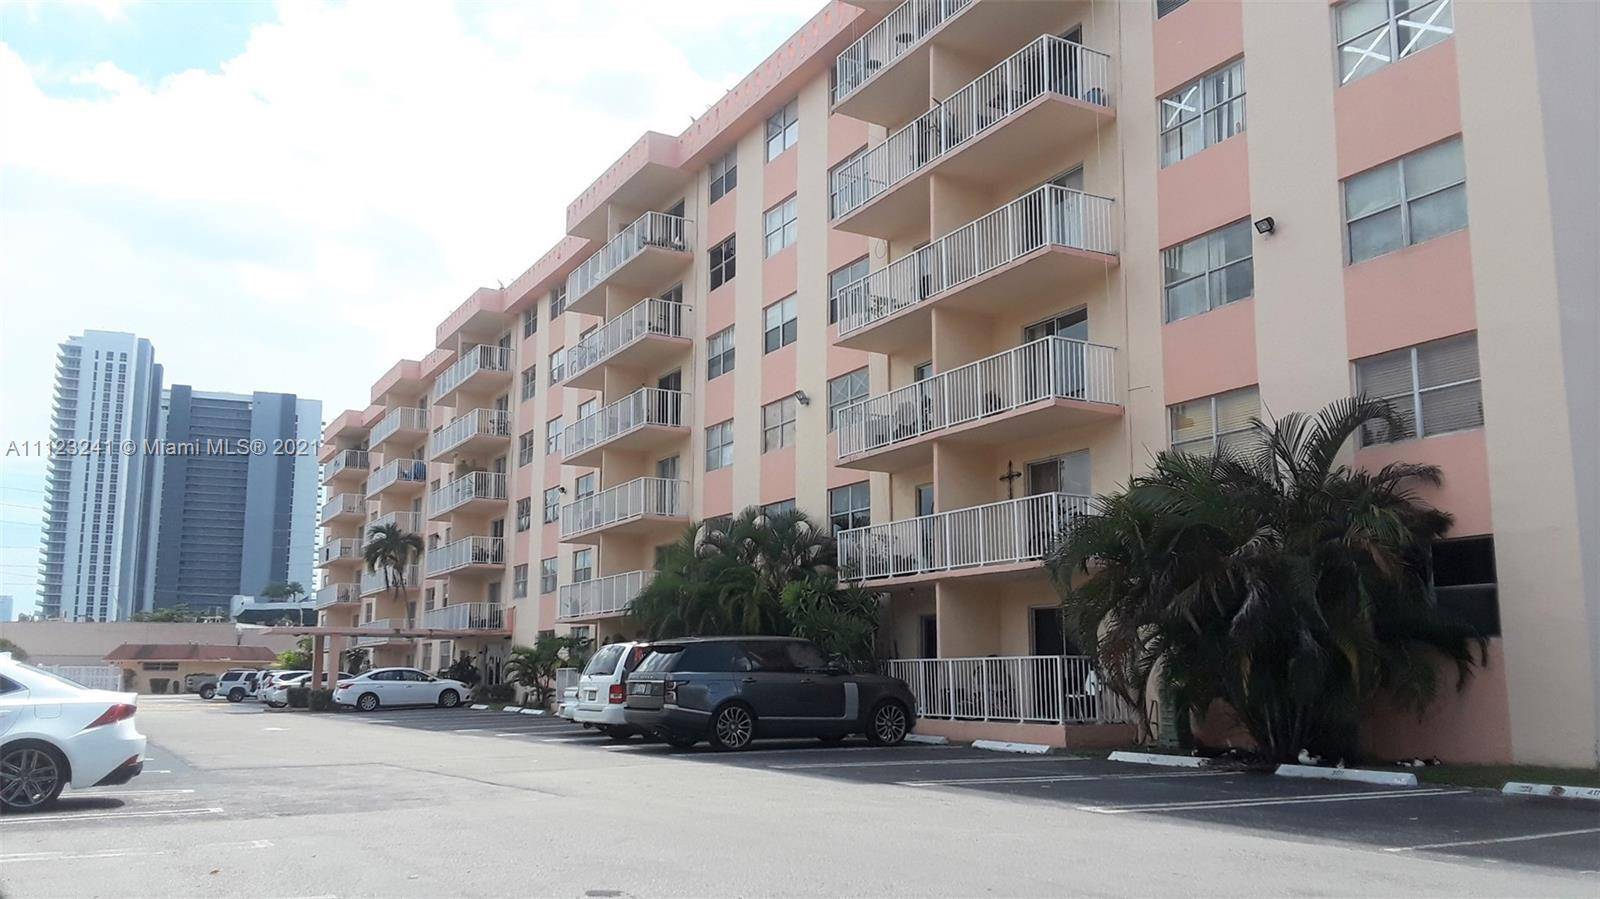 Nice 1 bed 1 bath with tiled floors throughout, freshly painted, open kitchen, balcony with water view, central air, and plenty of closet space.